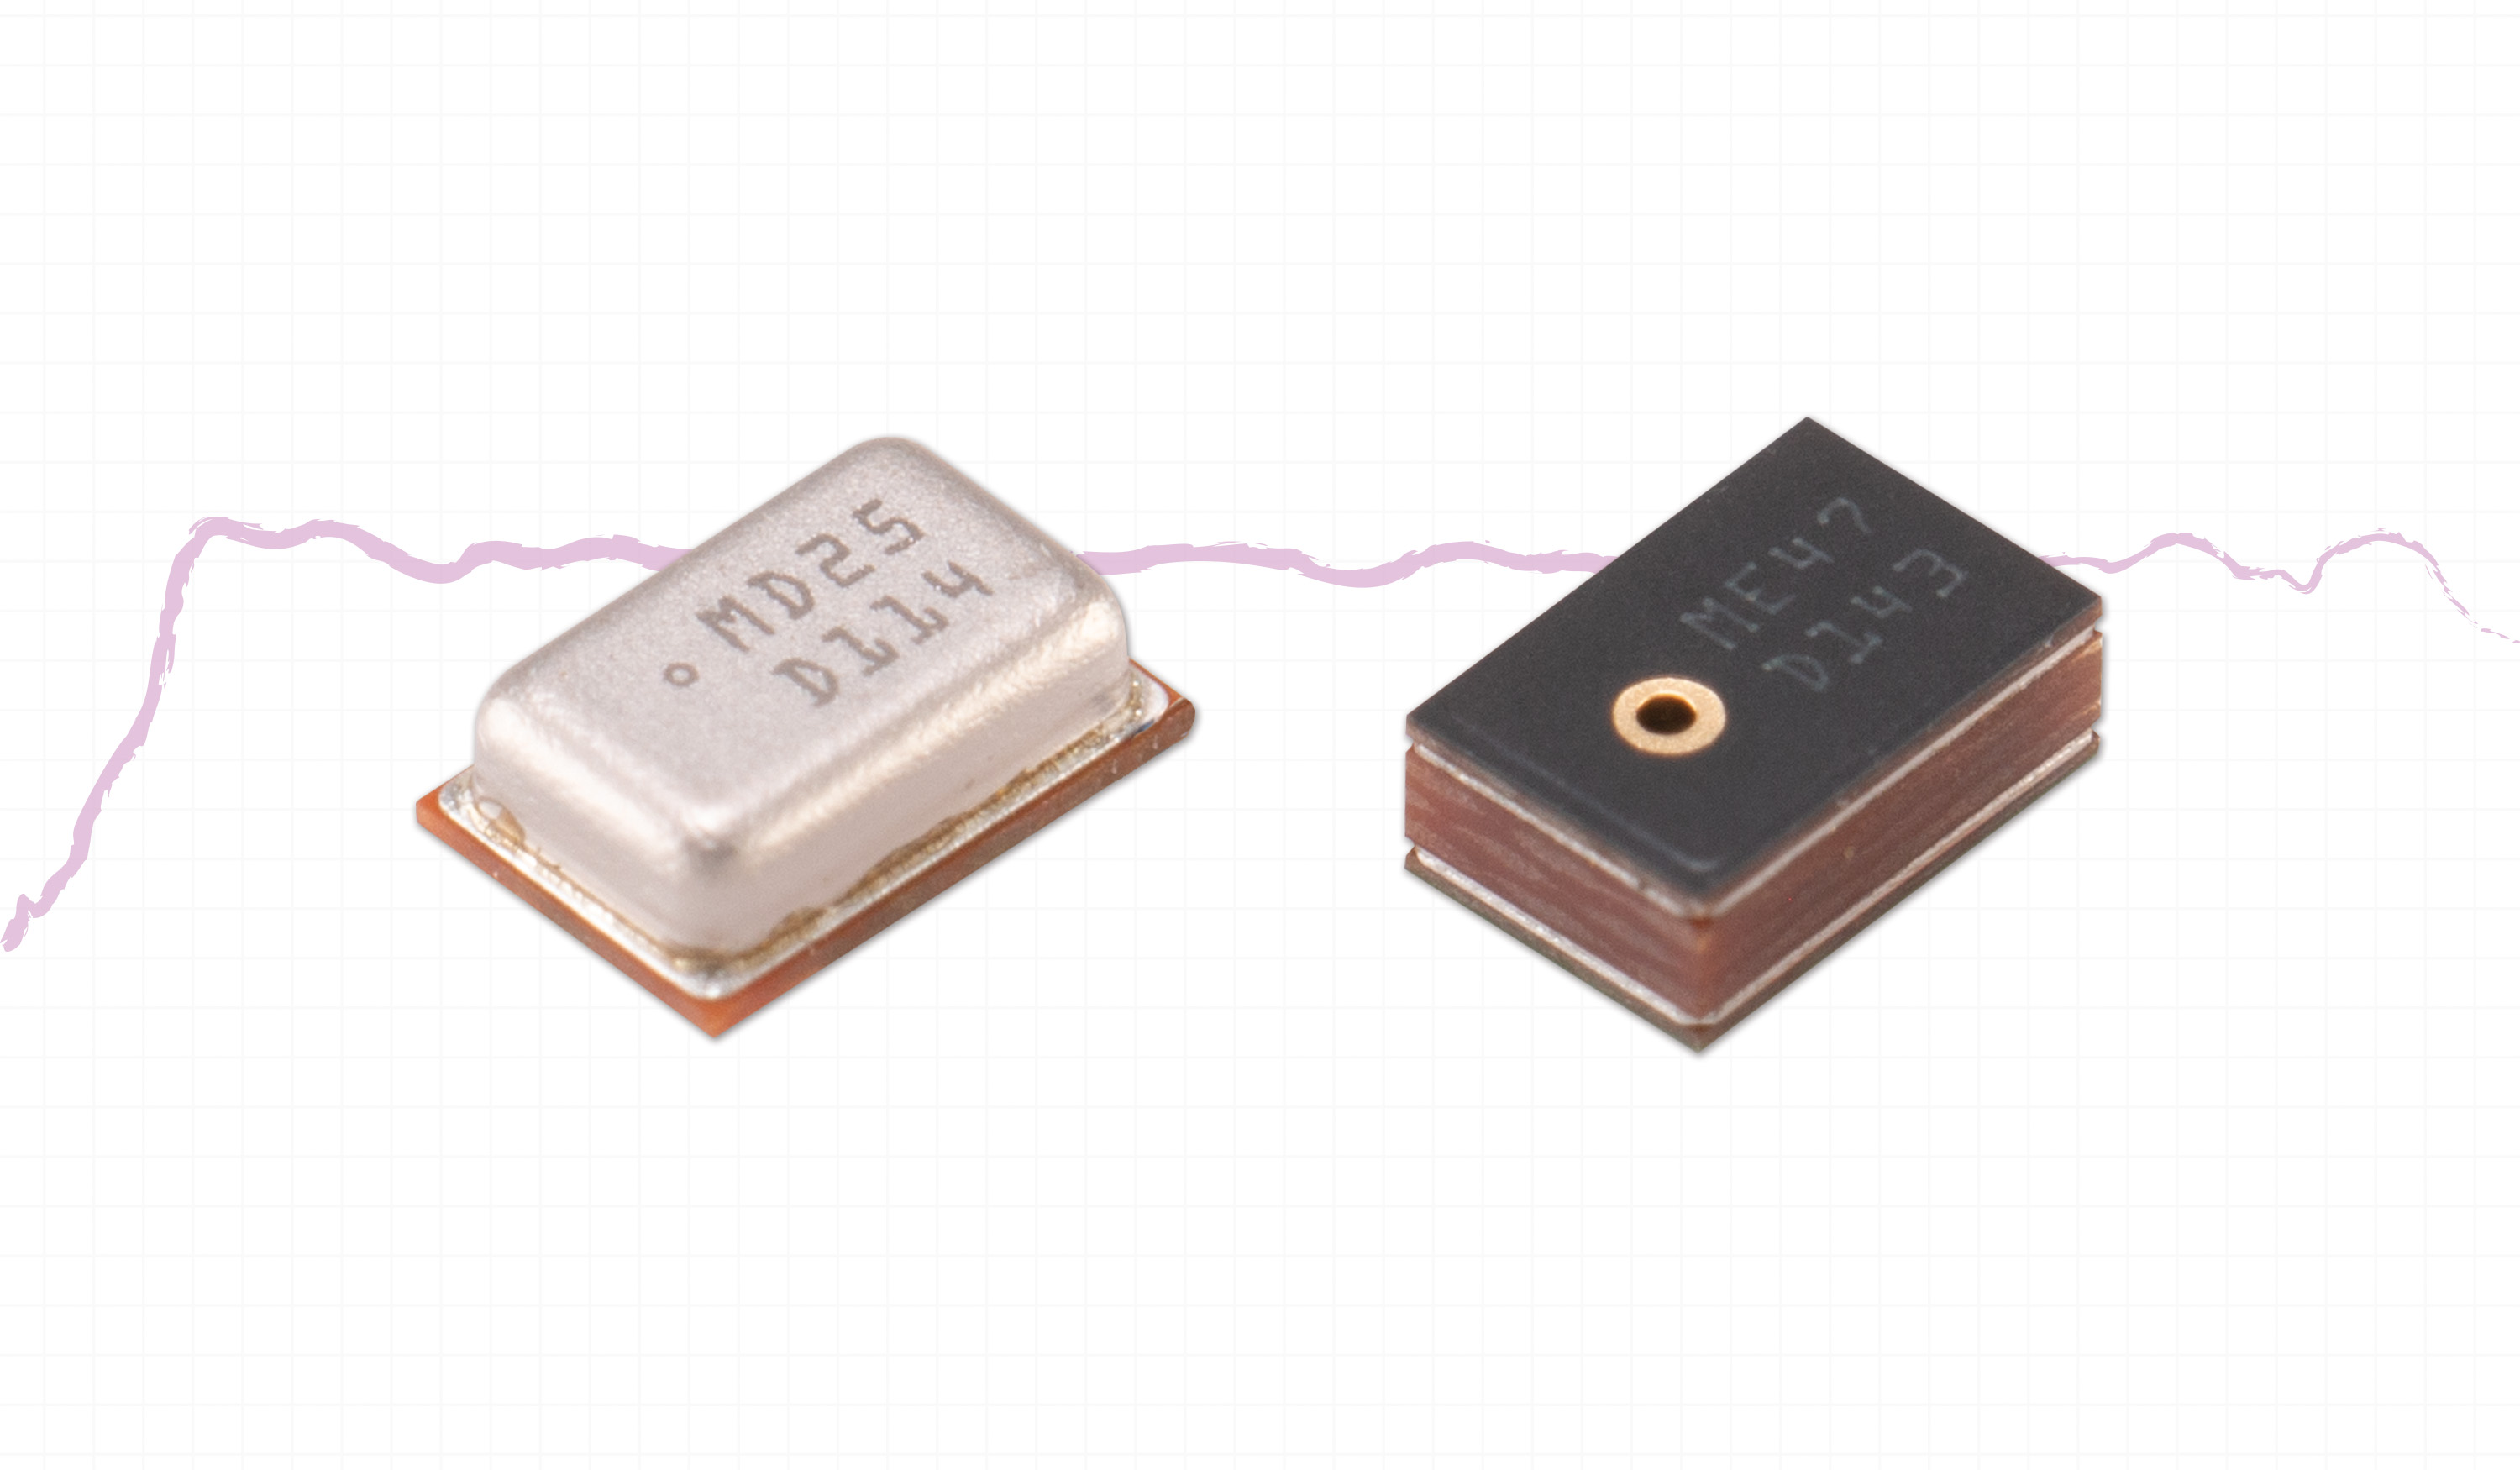 MEMS Microphones Carry Wide Operating Frequency Ranges